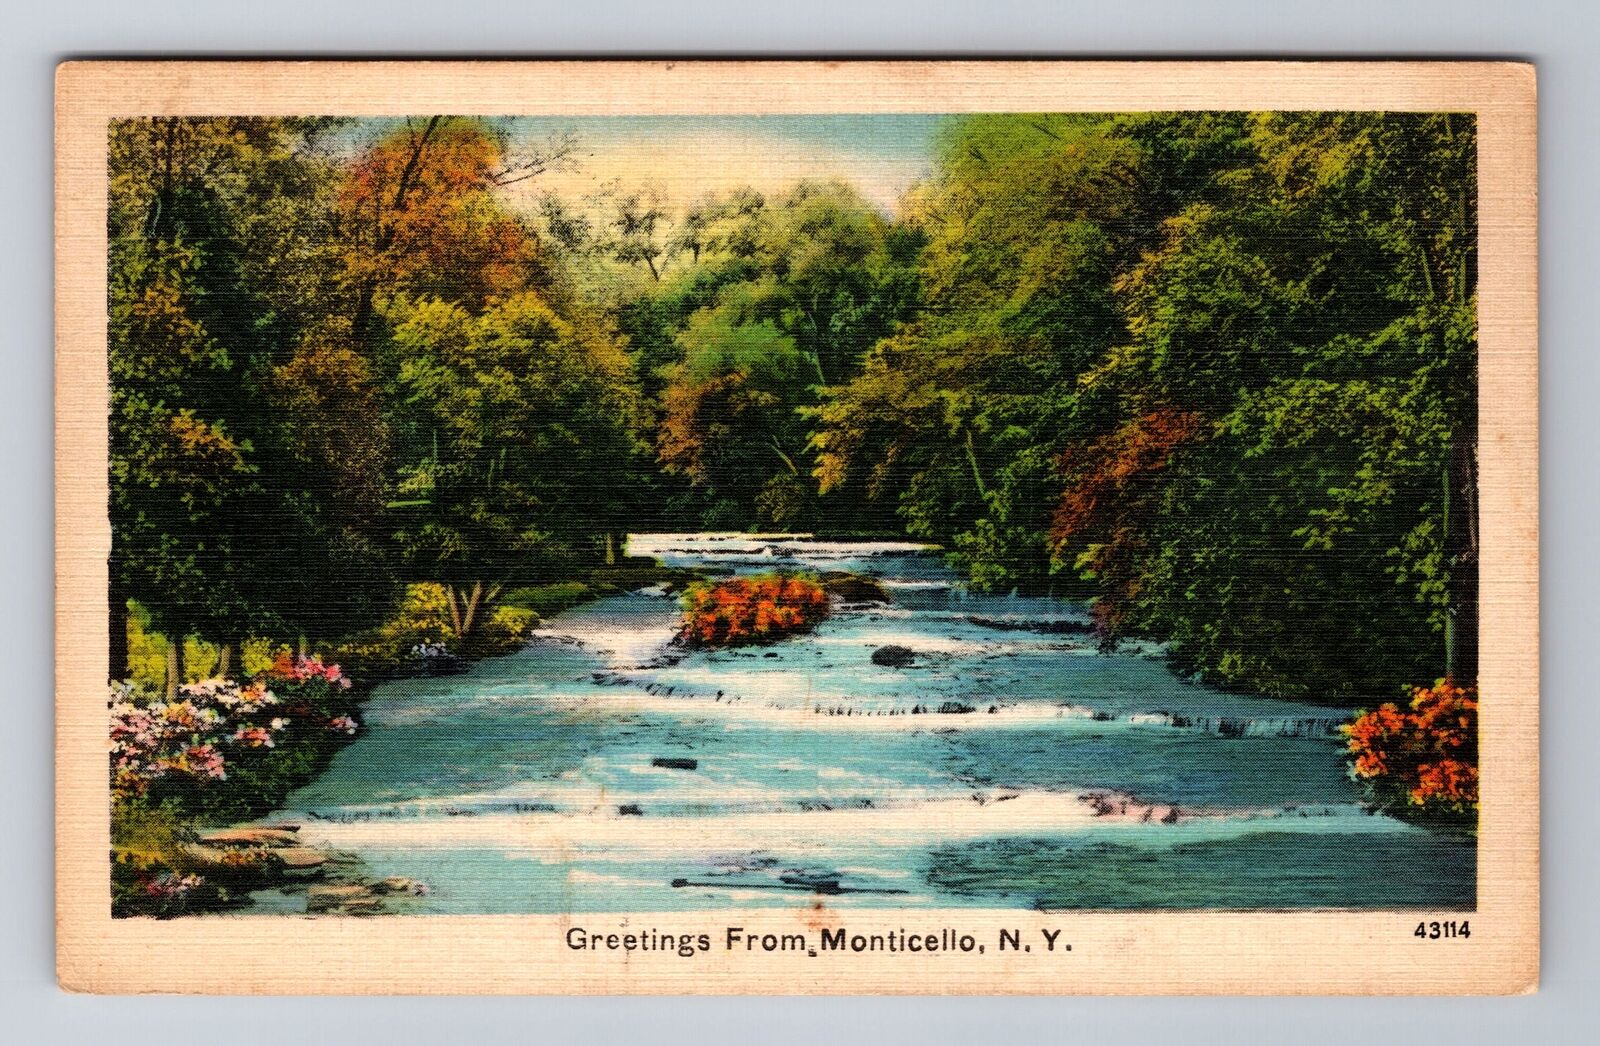 Monticello NY-New York, General Greetings, Antique c1941 Vintage Postcard